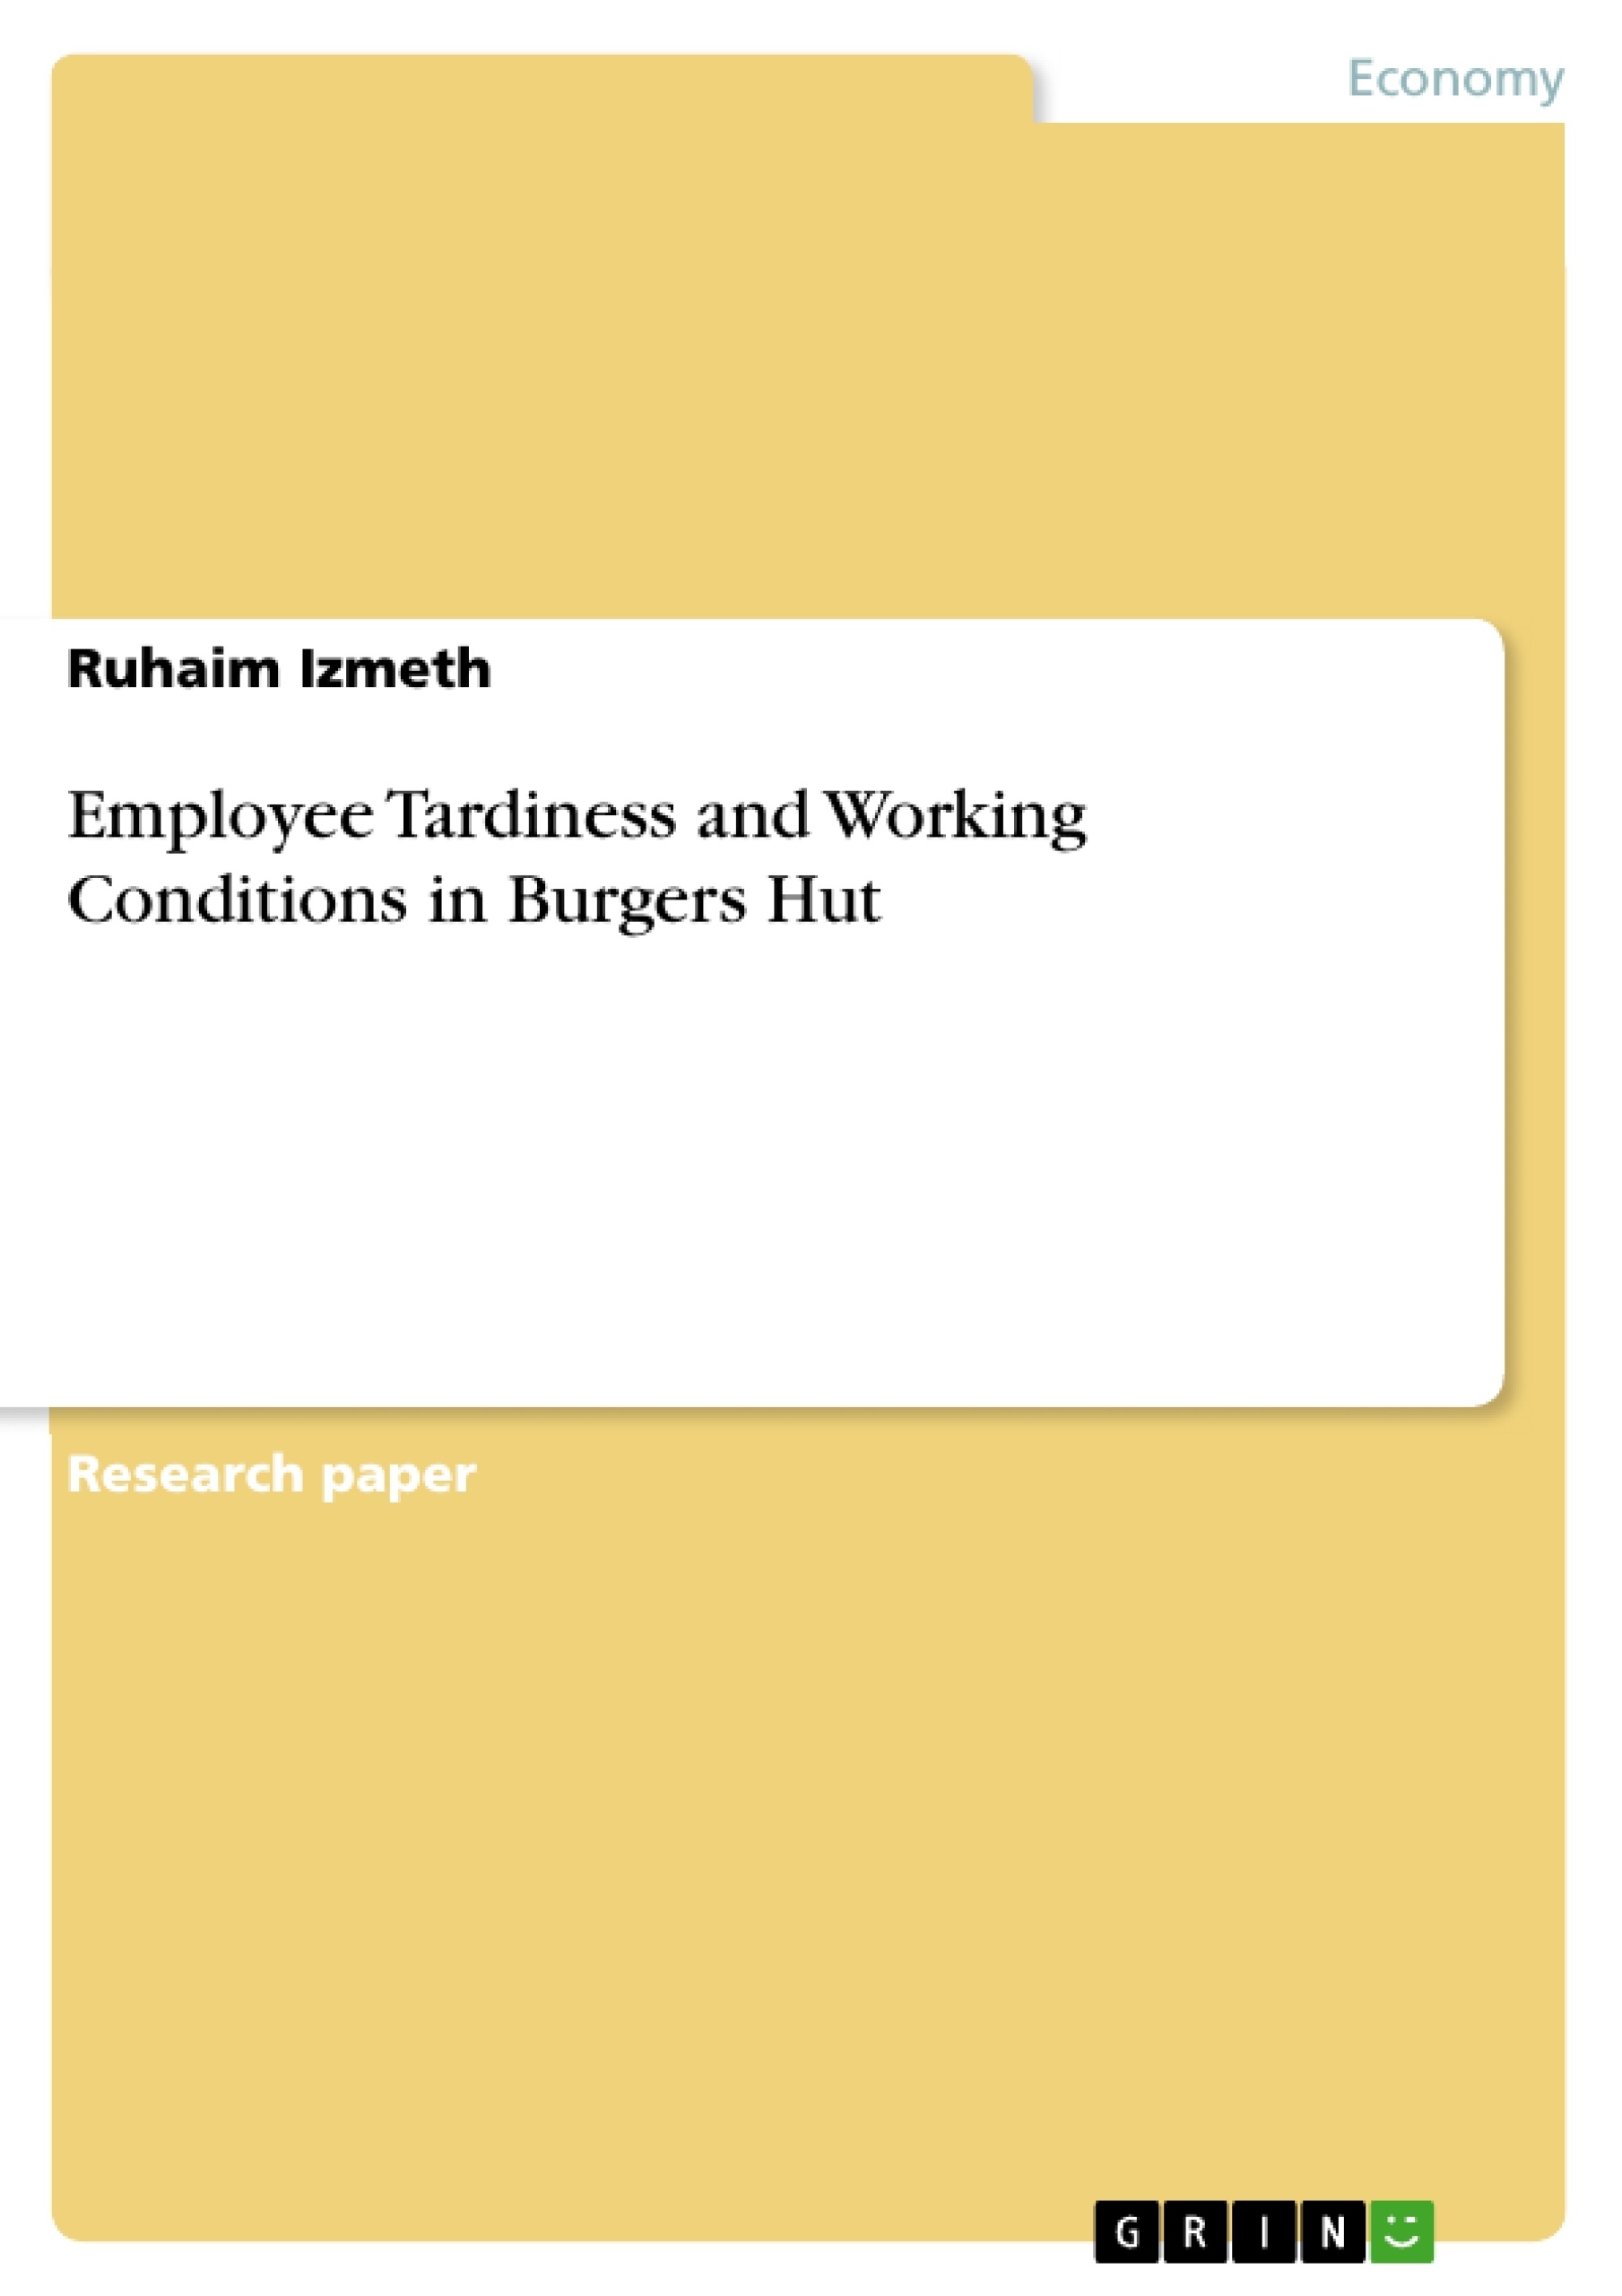 Title: Employee Tardiness and Working Conditions in Burgers Hut